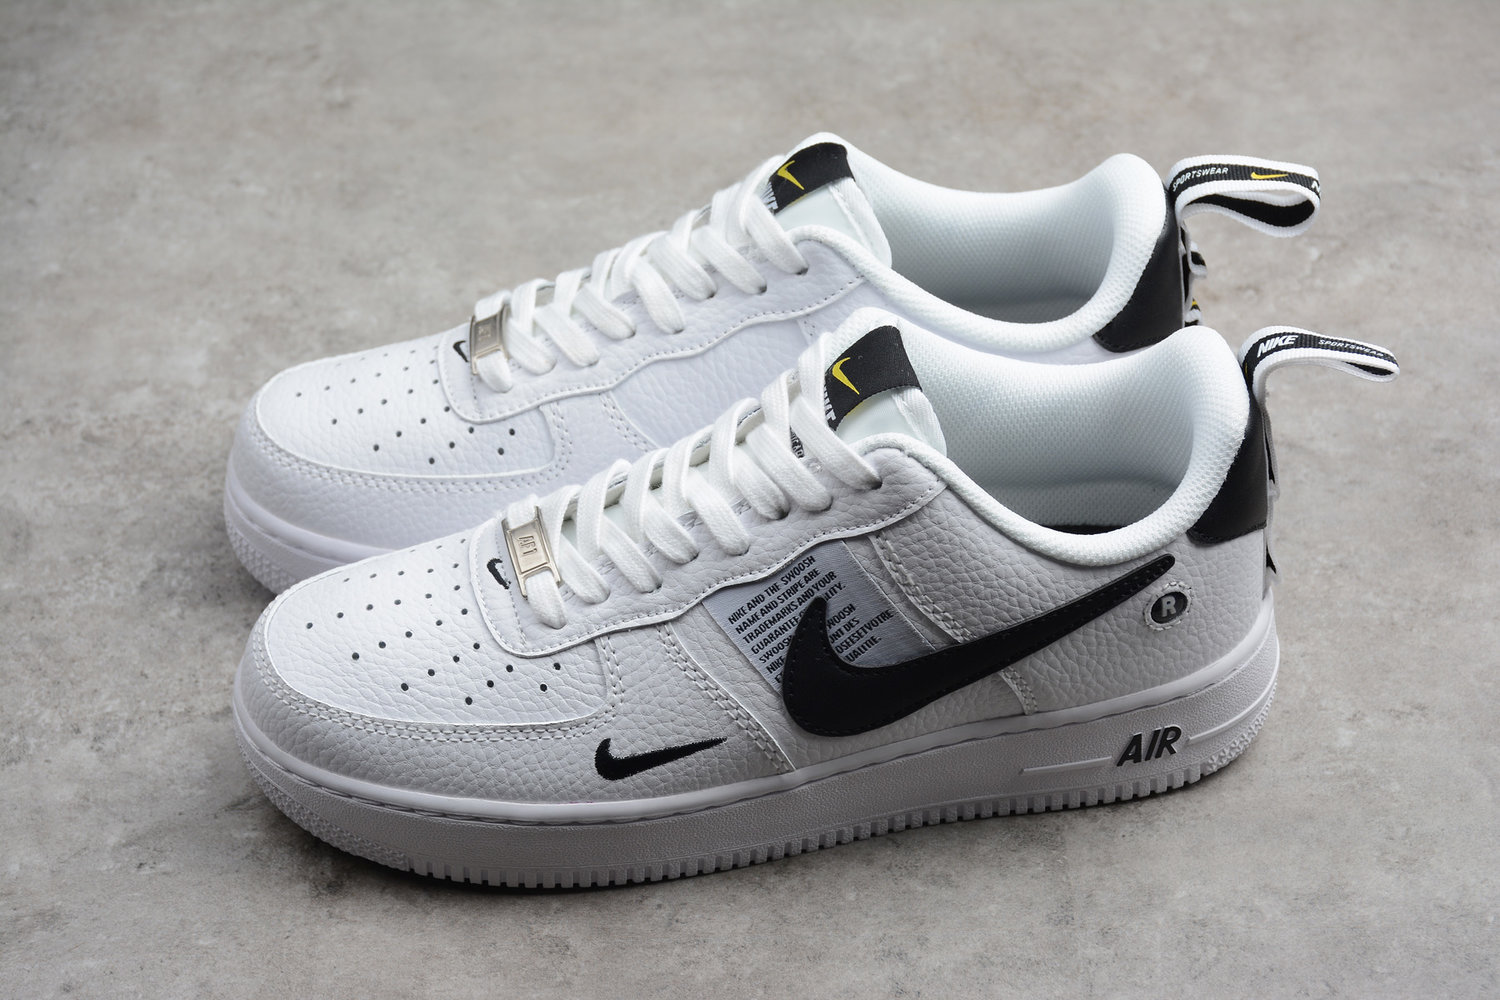 Now Available: Air Force Low "White" — Shouts